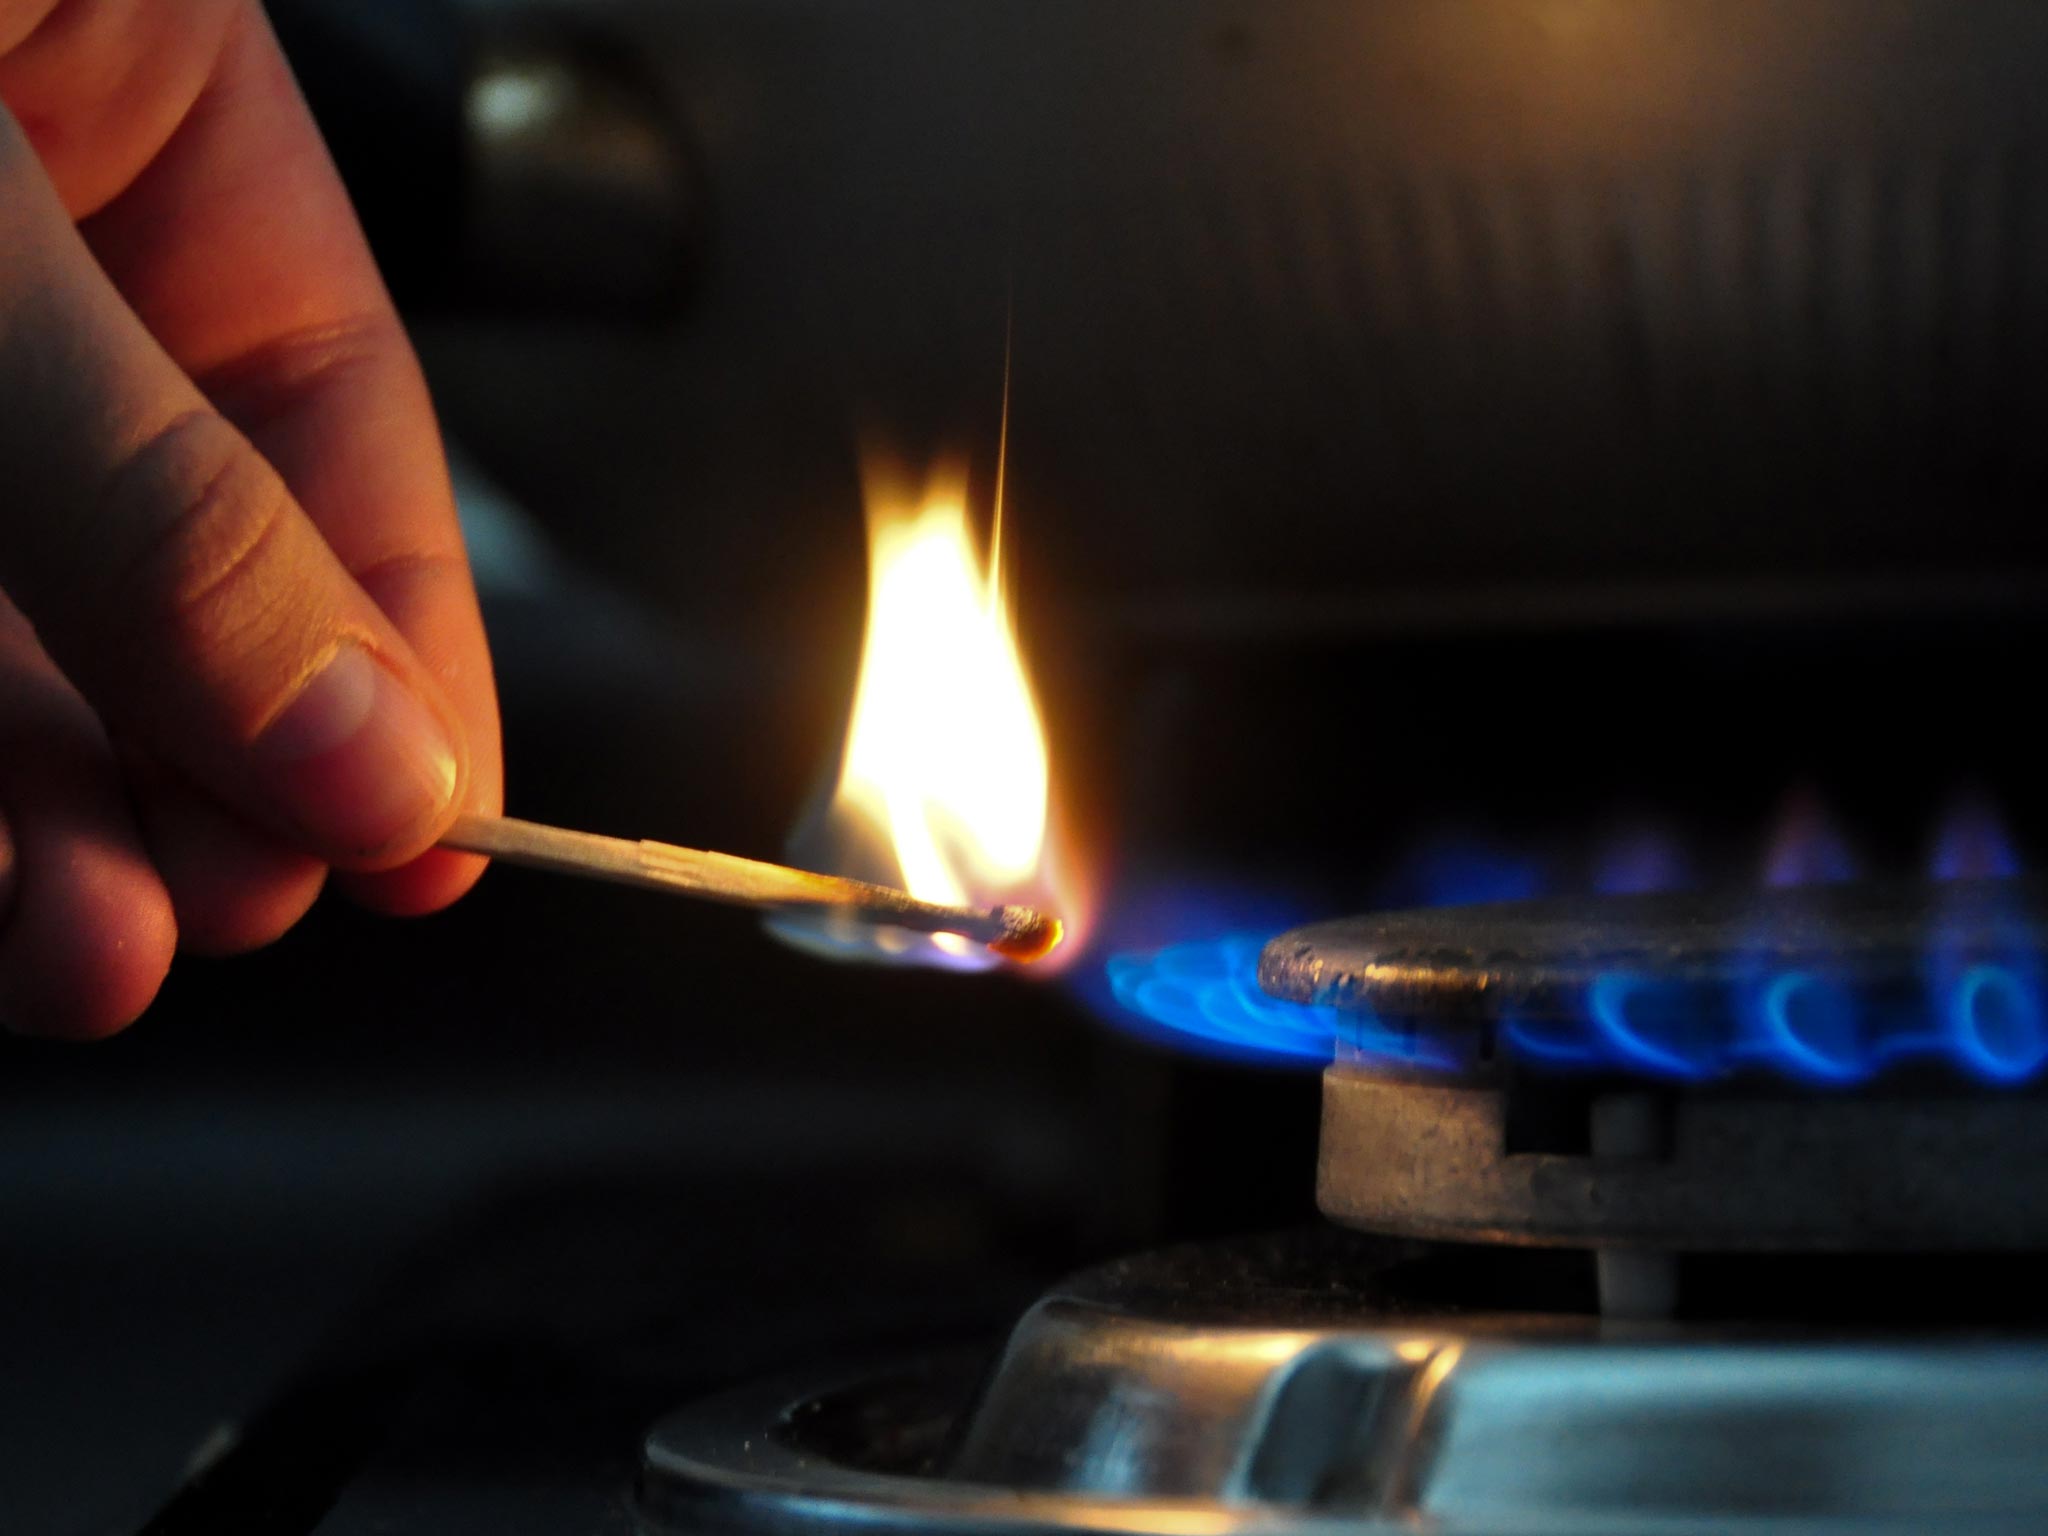 The company, which is owned by Centrica, announced its latest round of price rises in August